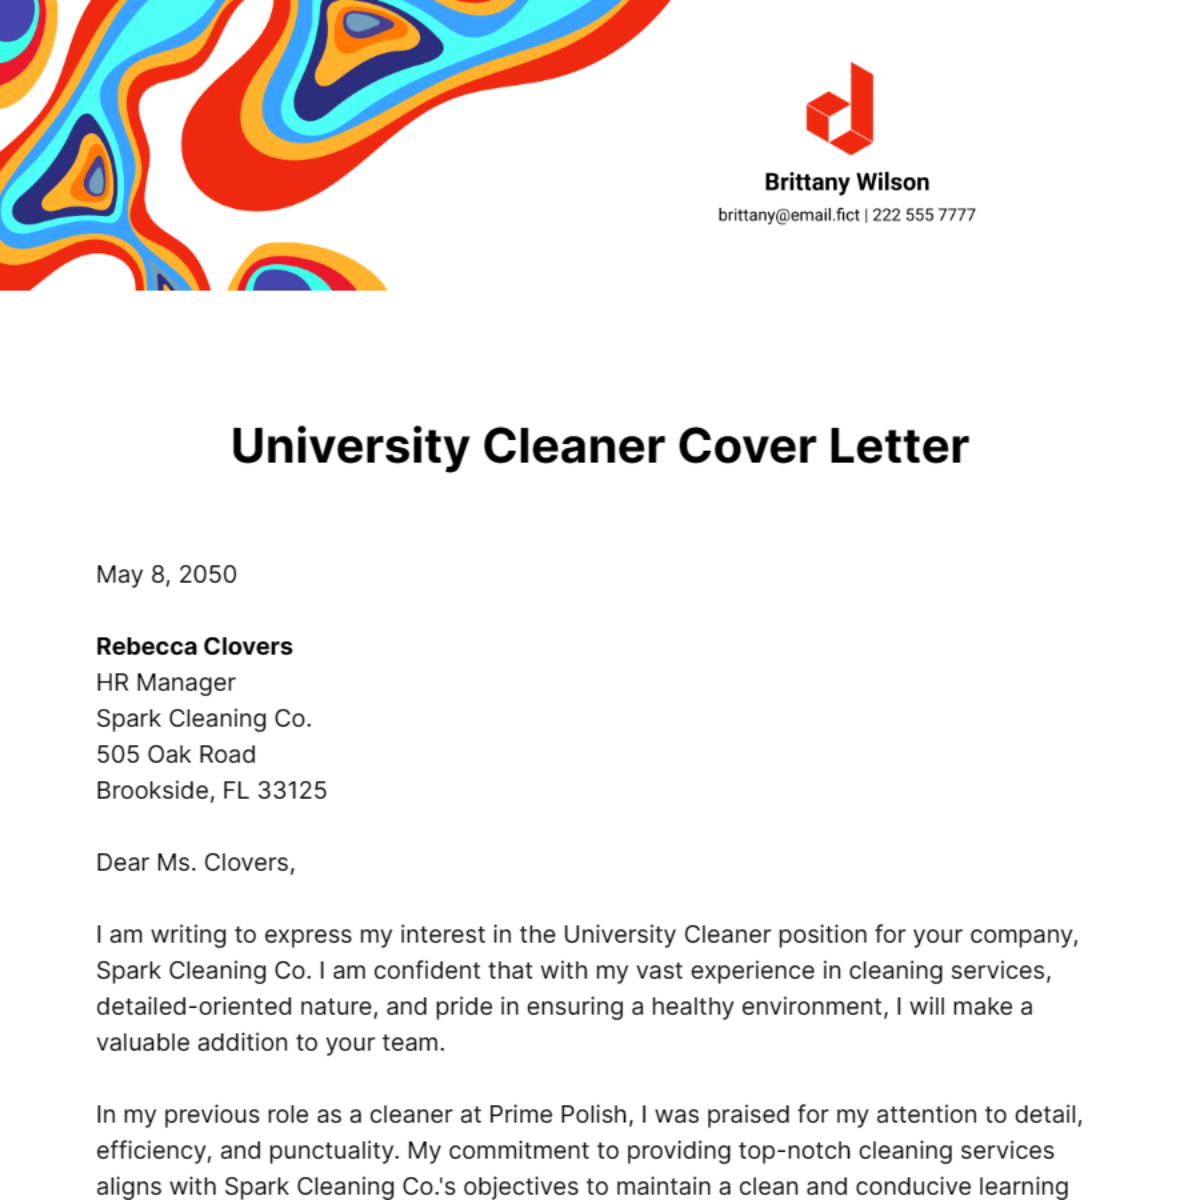 University Cleaner Cover Letter Template